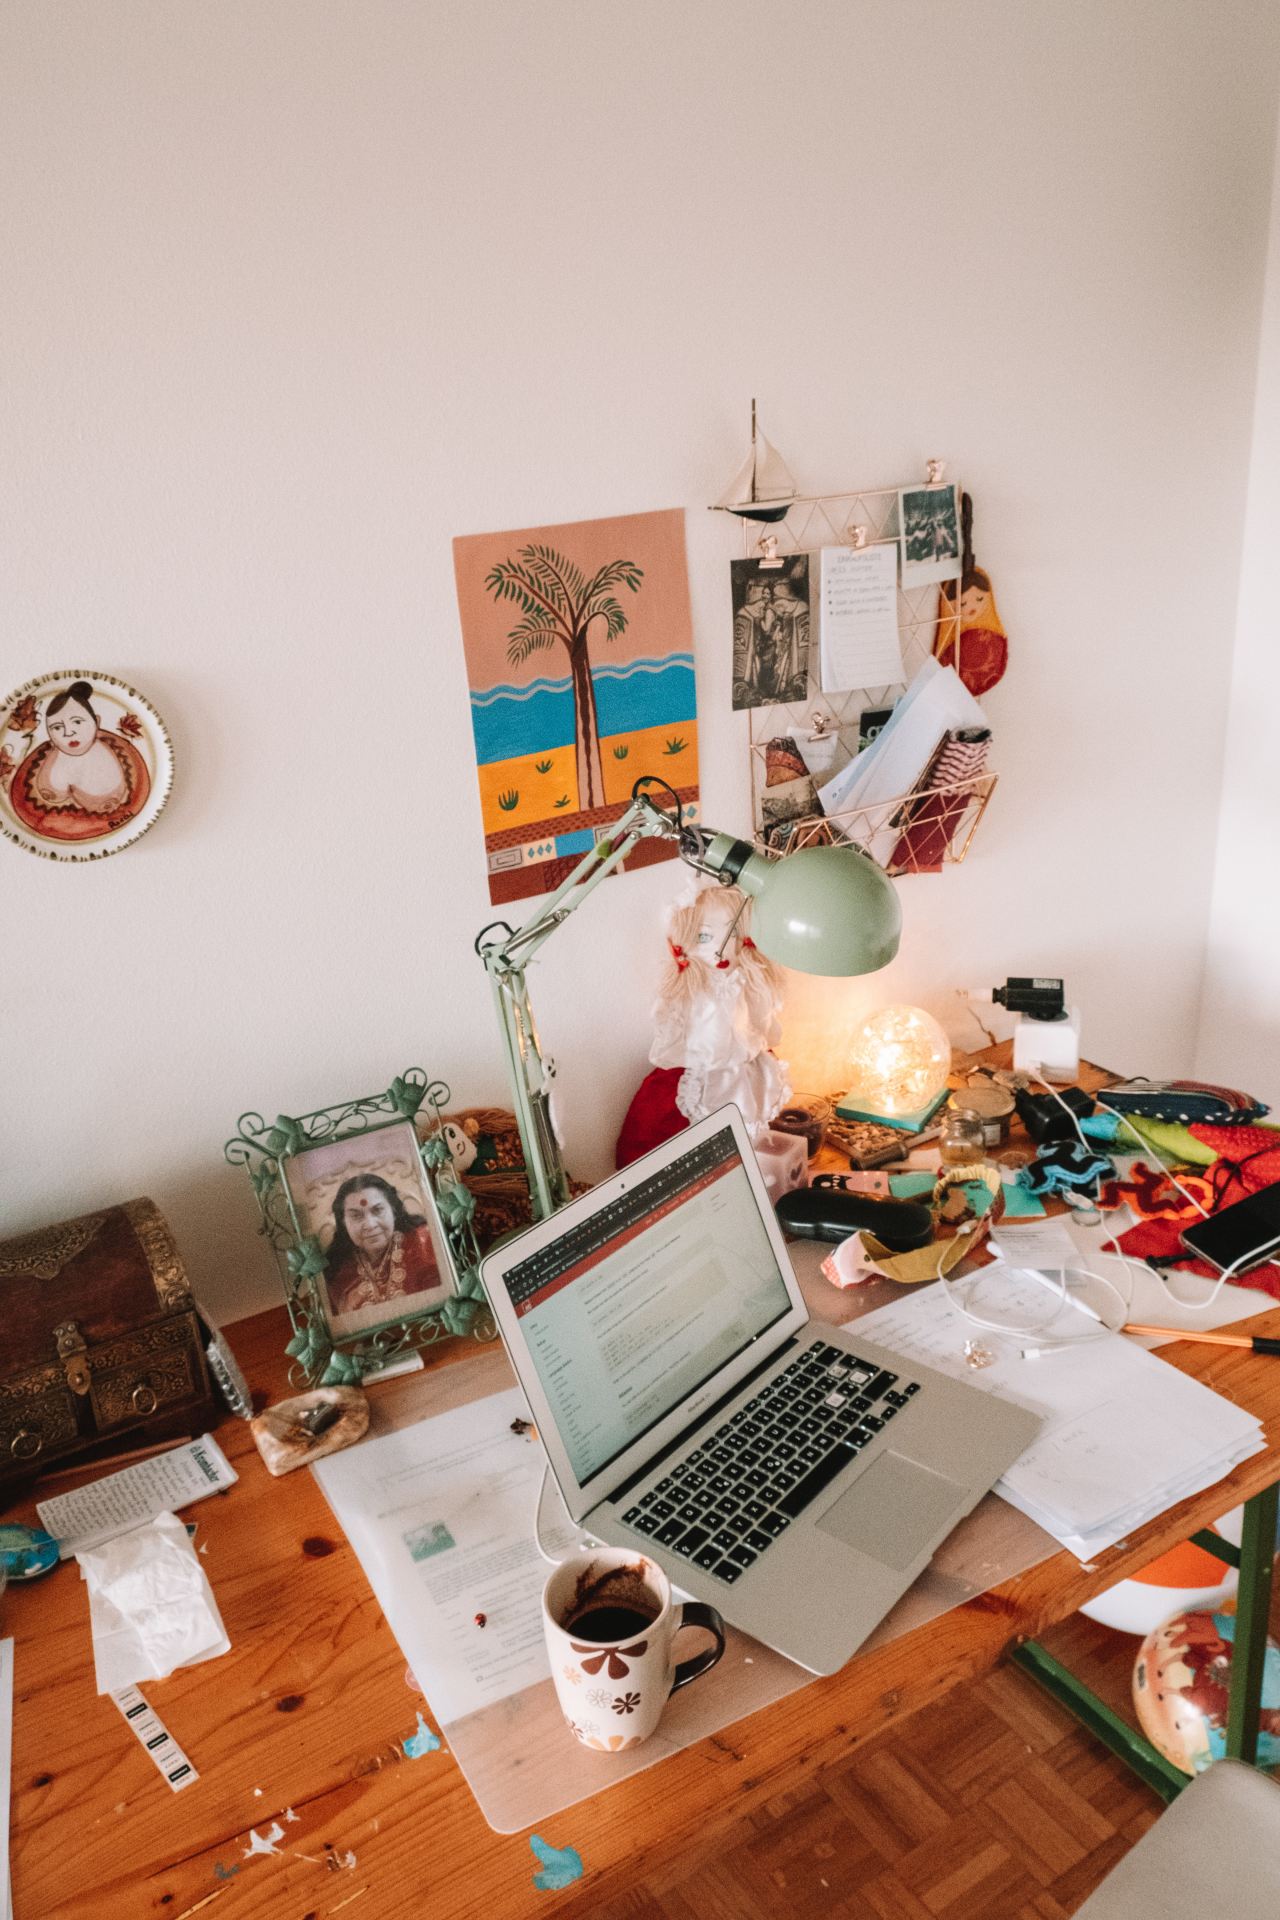 A desk set-up with a laptop, art on the walls and clutter on the desk